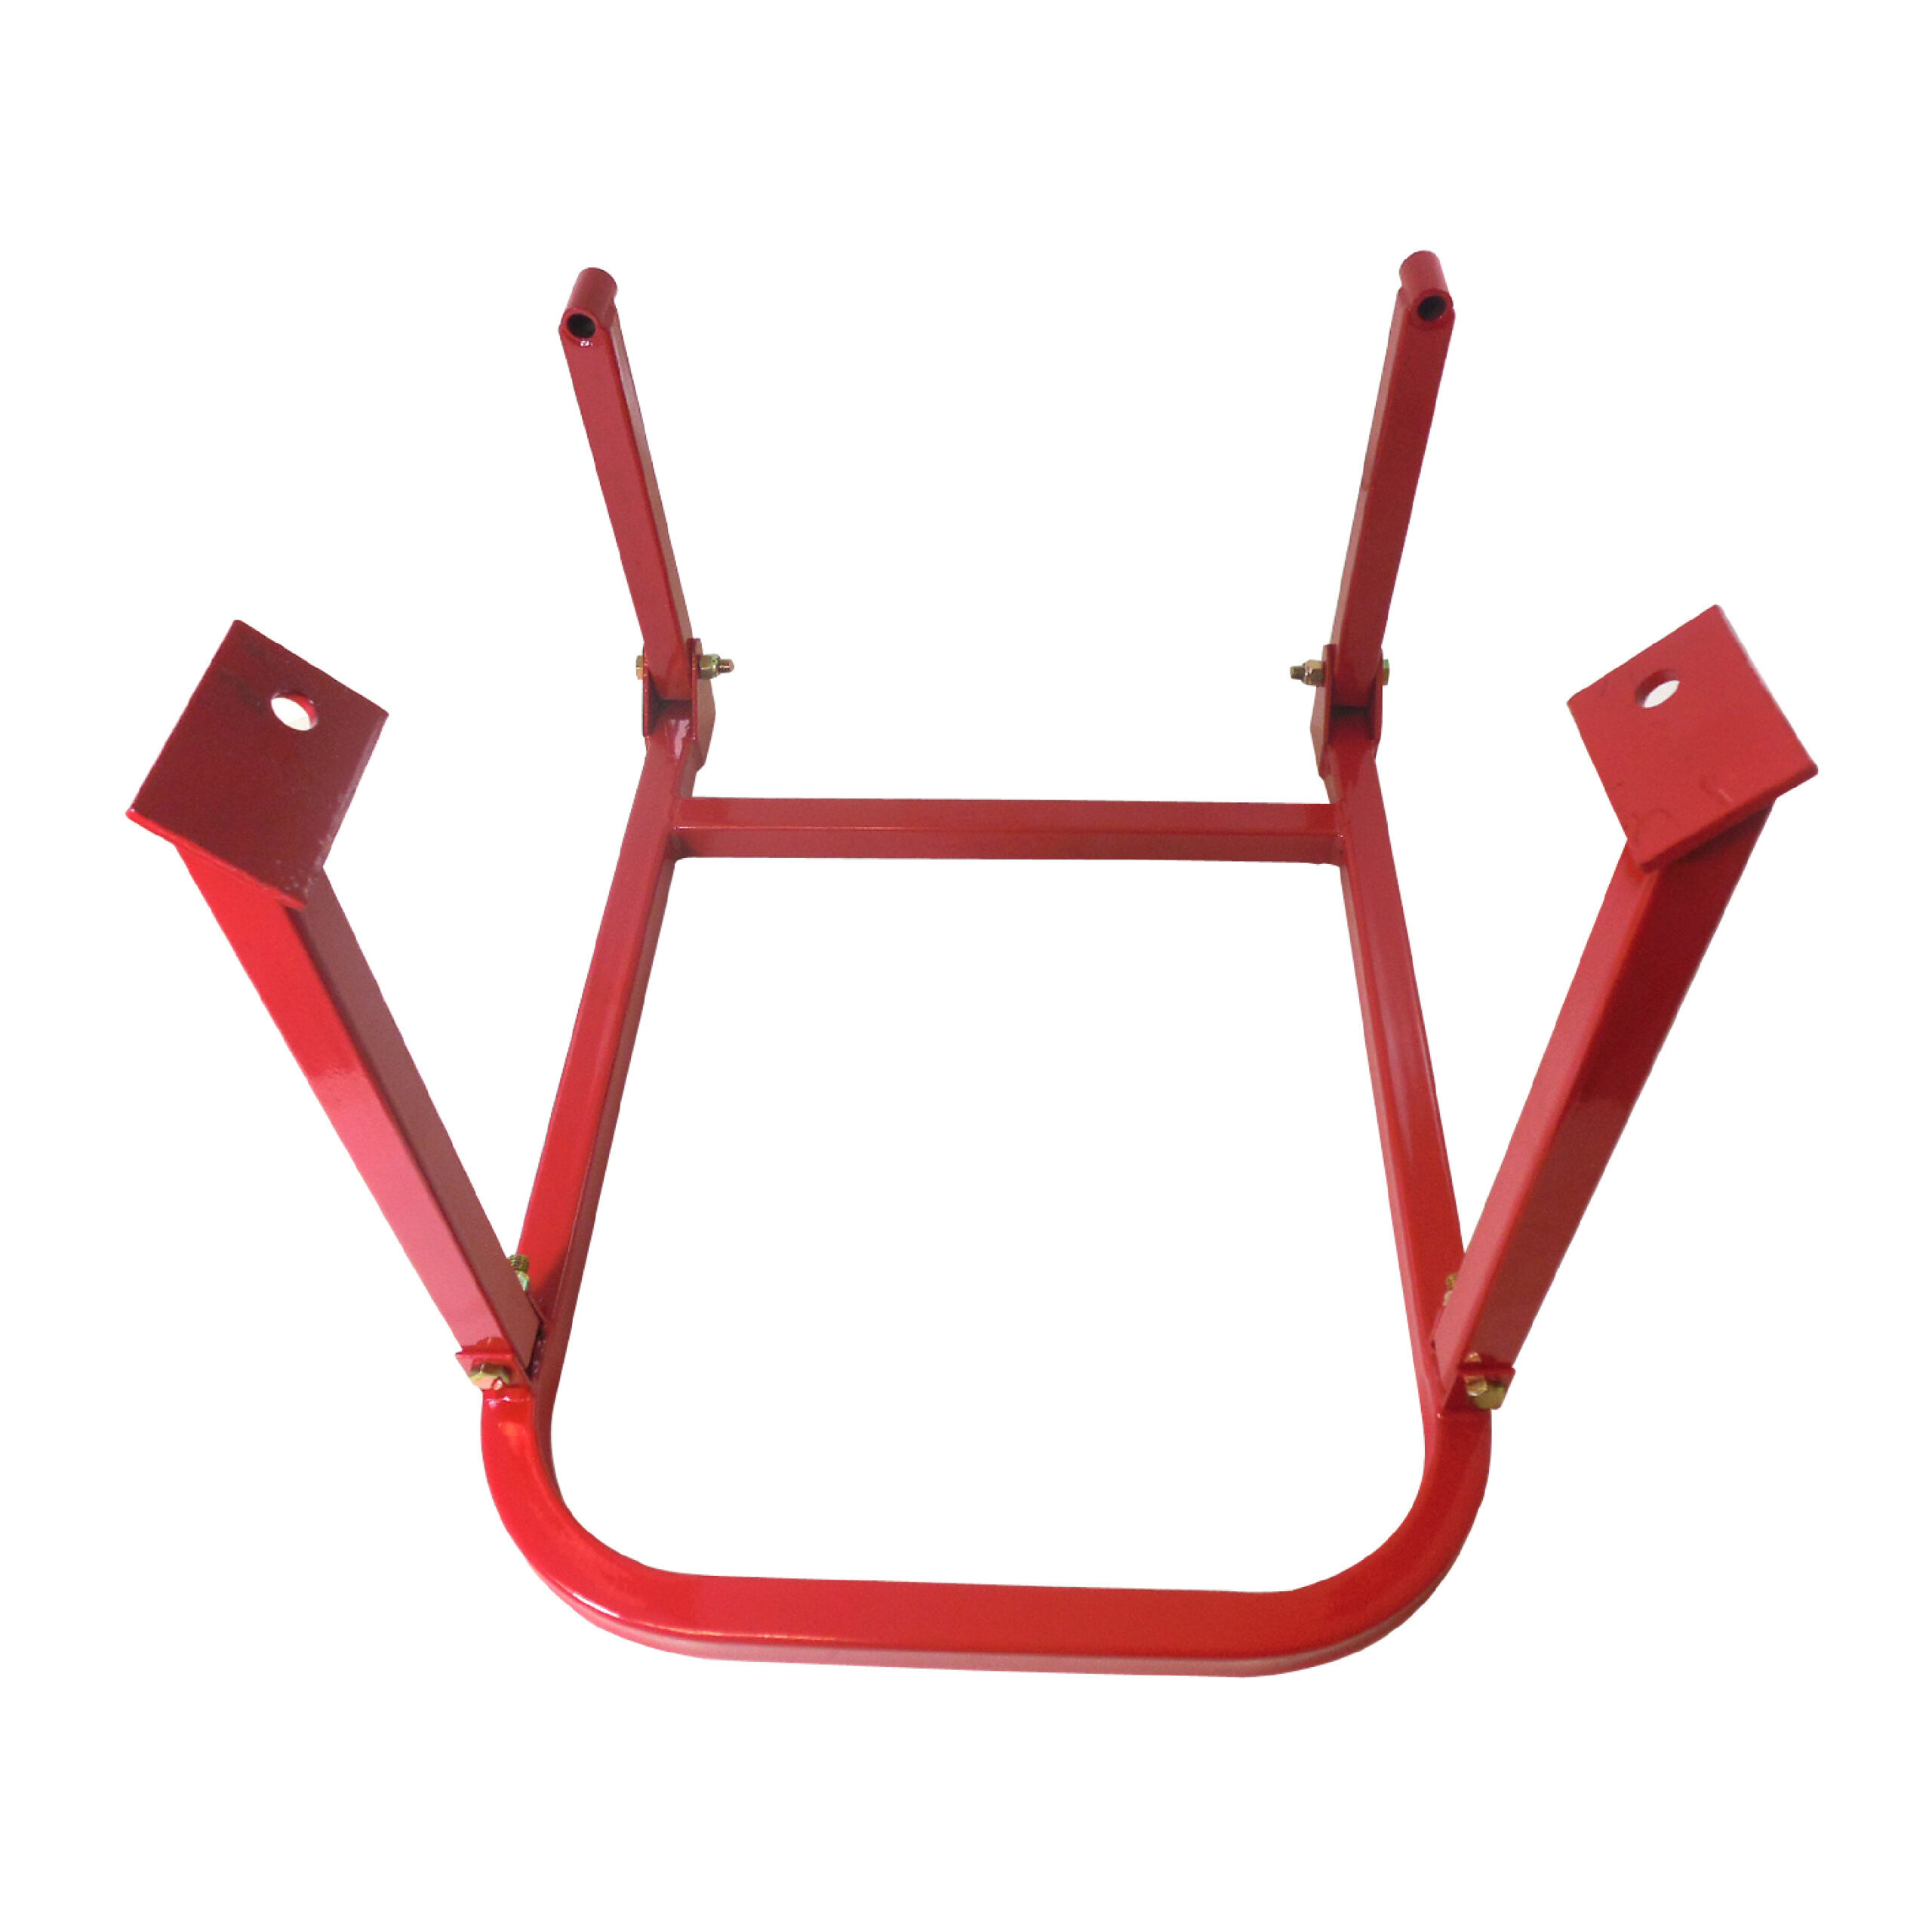 Racing Power Company R1900 Engine Cradle, Foldable, 1 x 1 in Rectangle Tube, Steel, Red Paint, Big Block Chevy / Small Block Chevy, Each